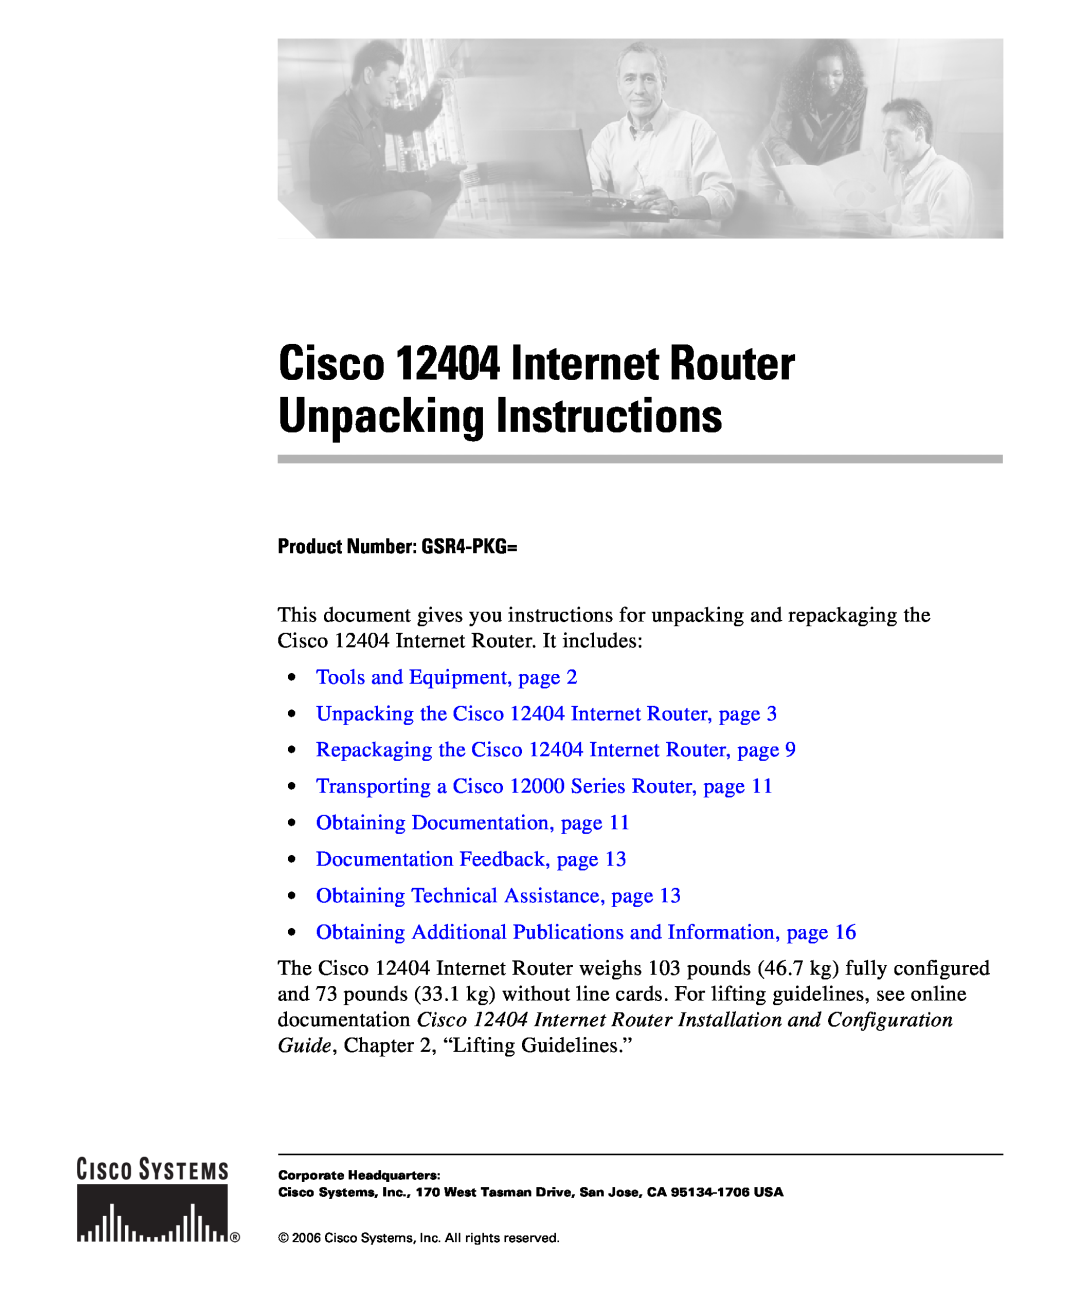 Cisco Systems manual Cisco 12404 Internet Router Unpacking Instructions, Product Number GSR4-PKG= 